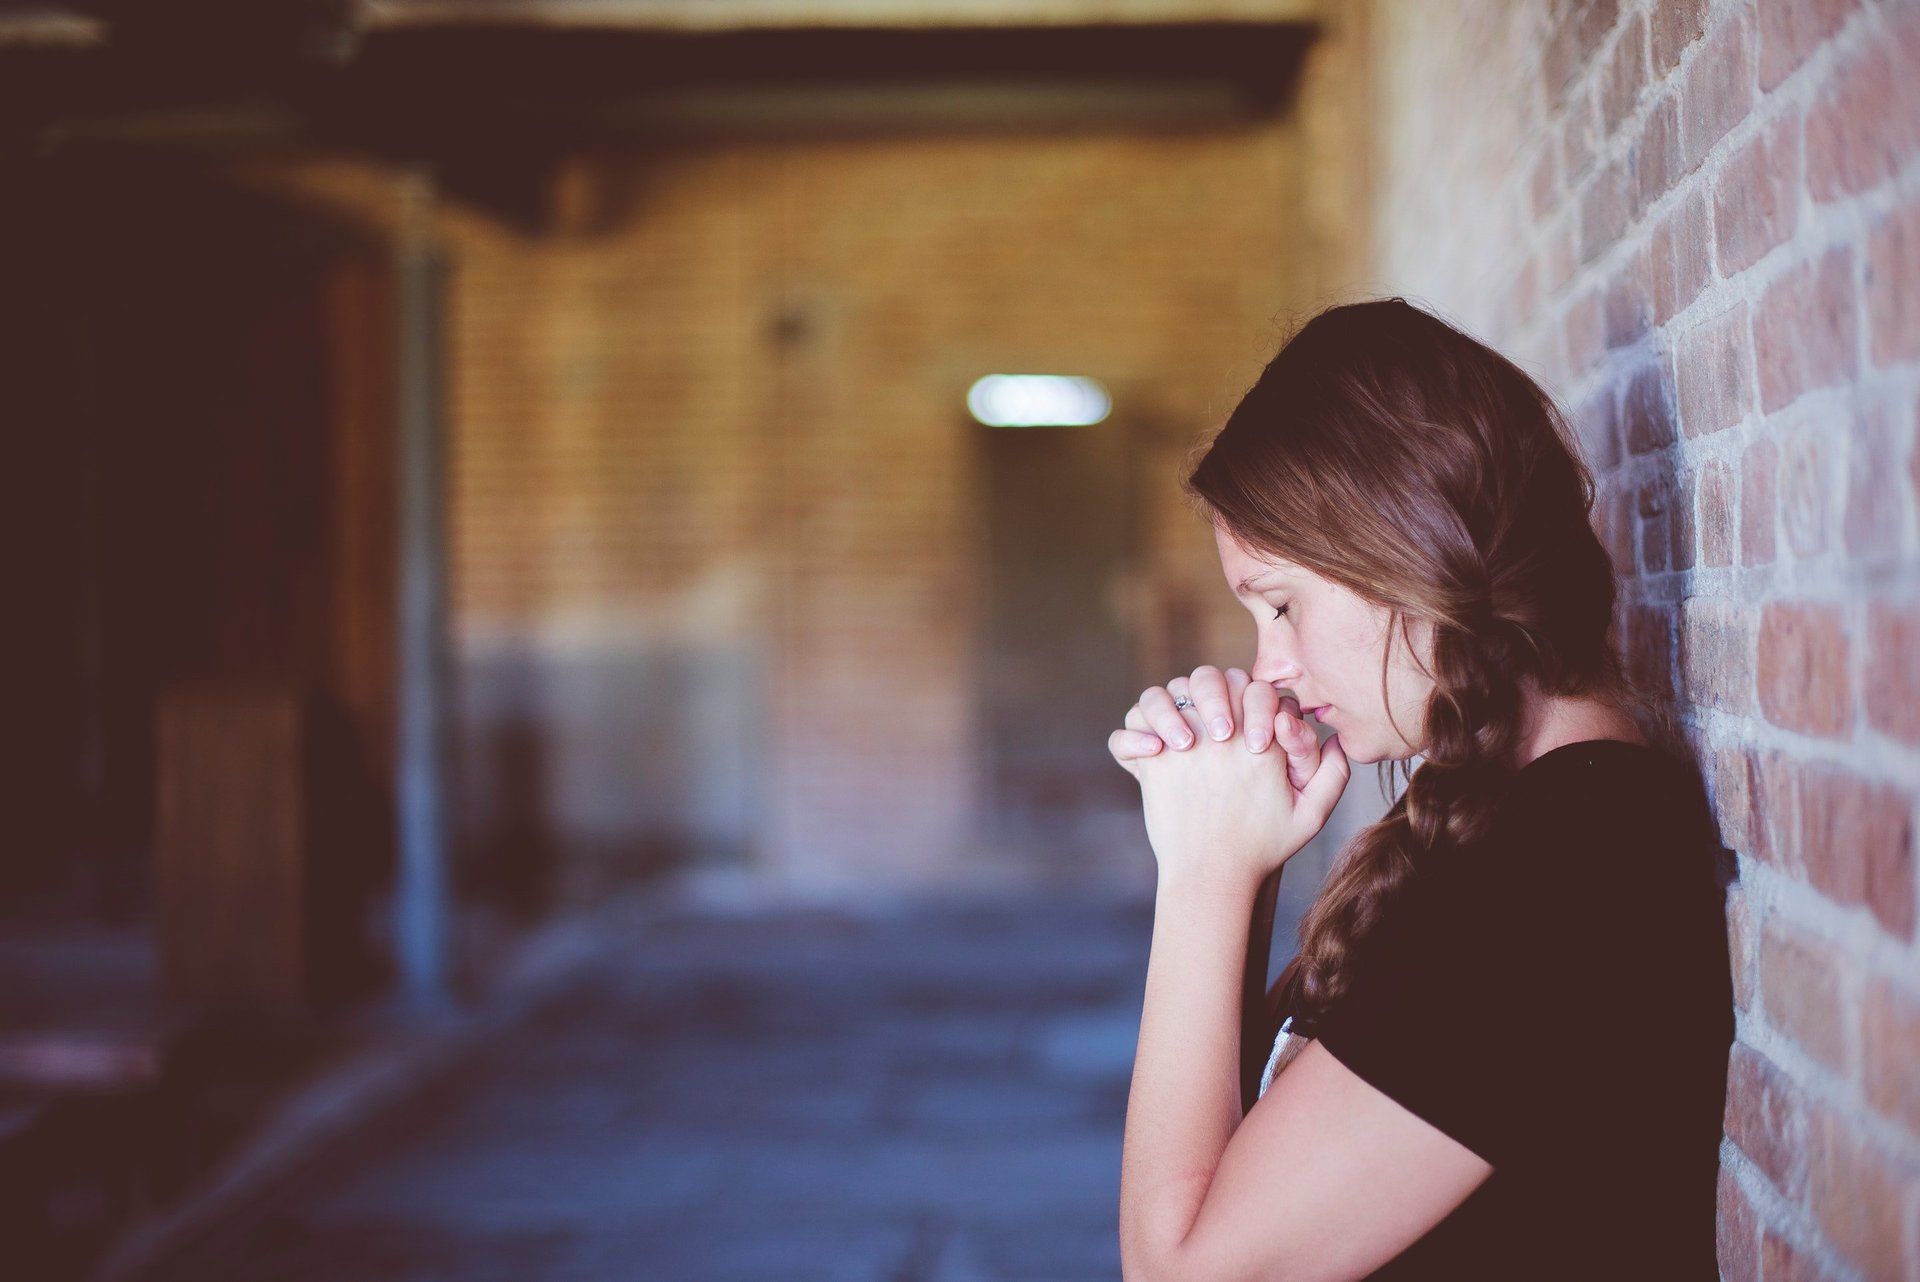 Young woman with back to wall, praying